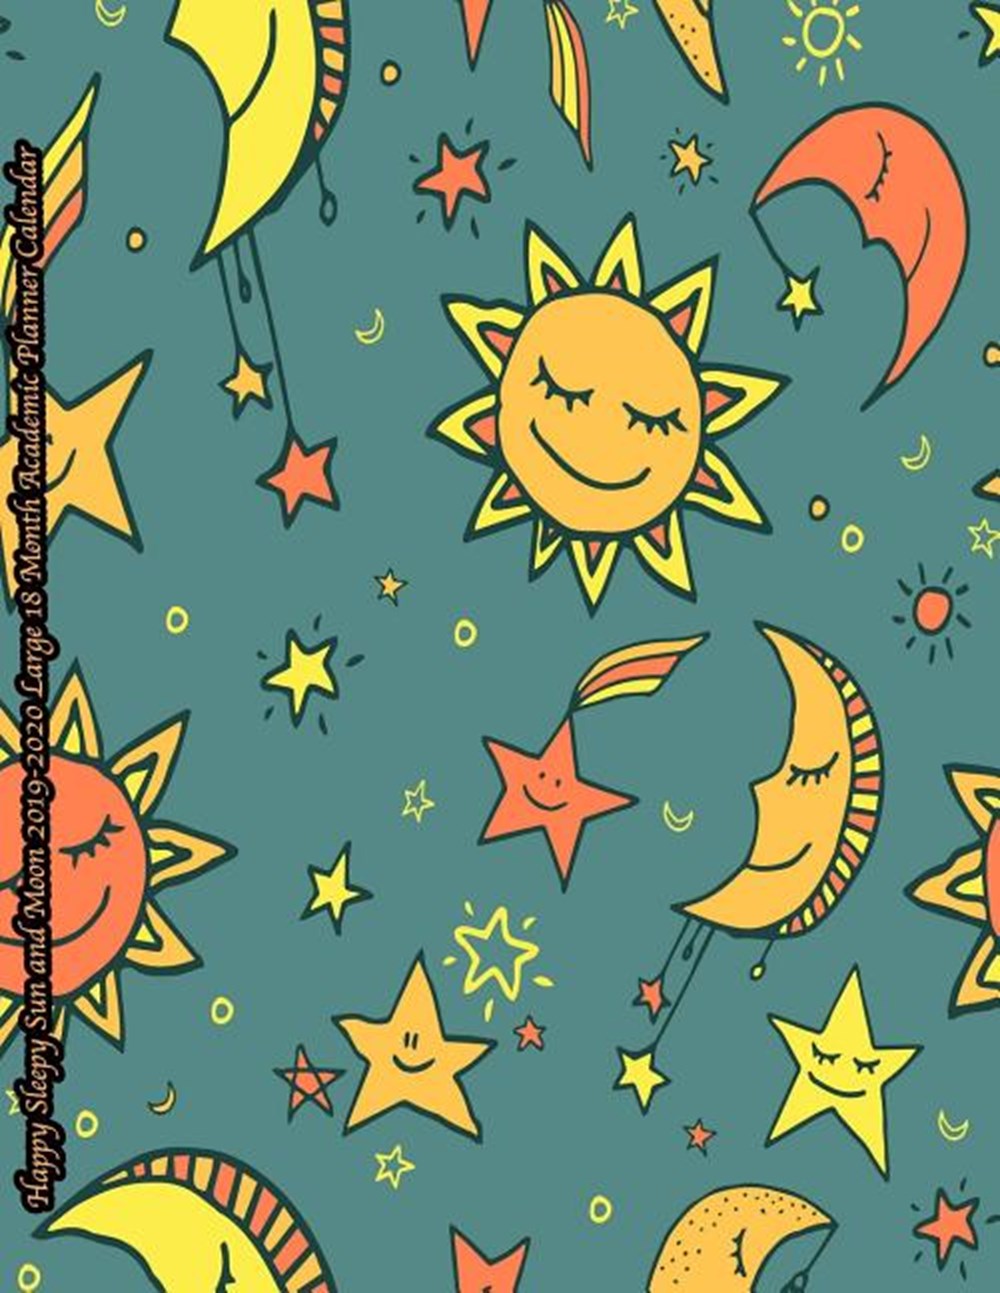 Happy Sleepy Sun and Moon 2019-2020 Large 18 Month Academic Planner Calendar July 2019 To December 2